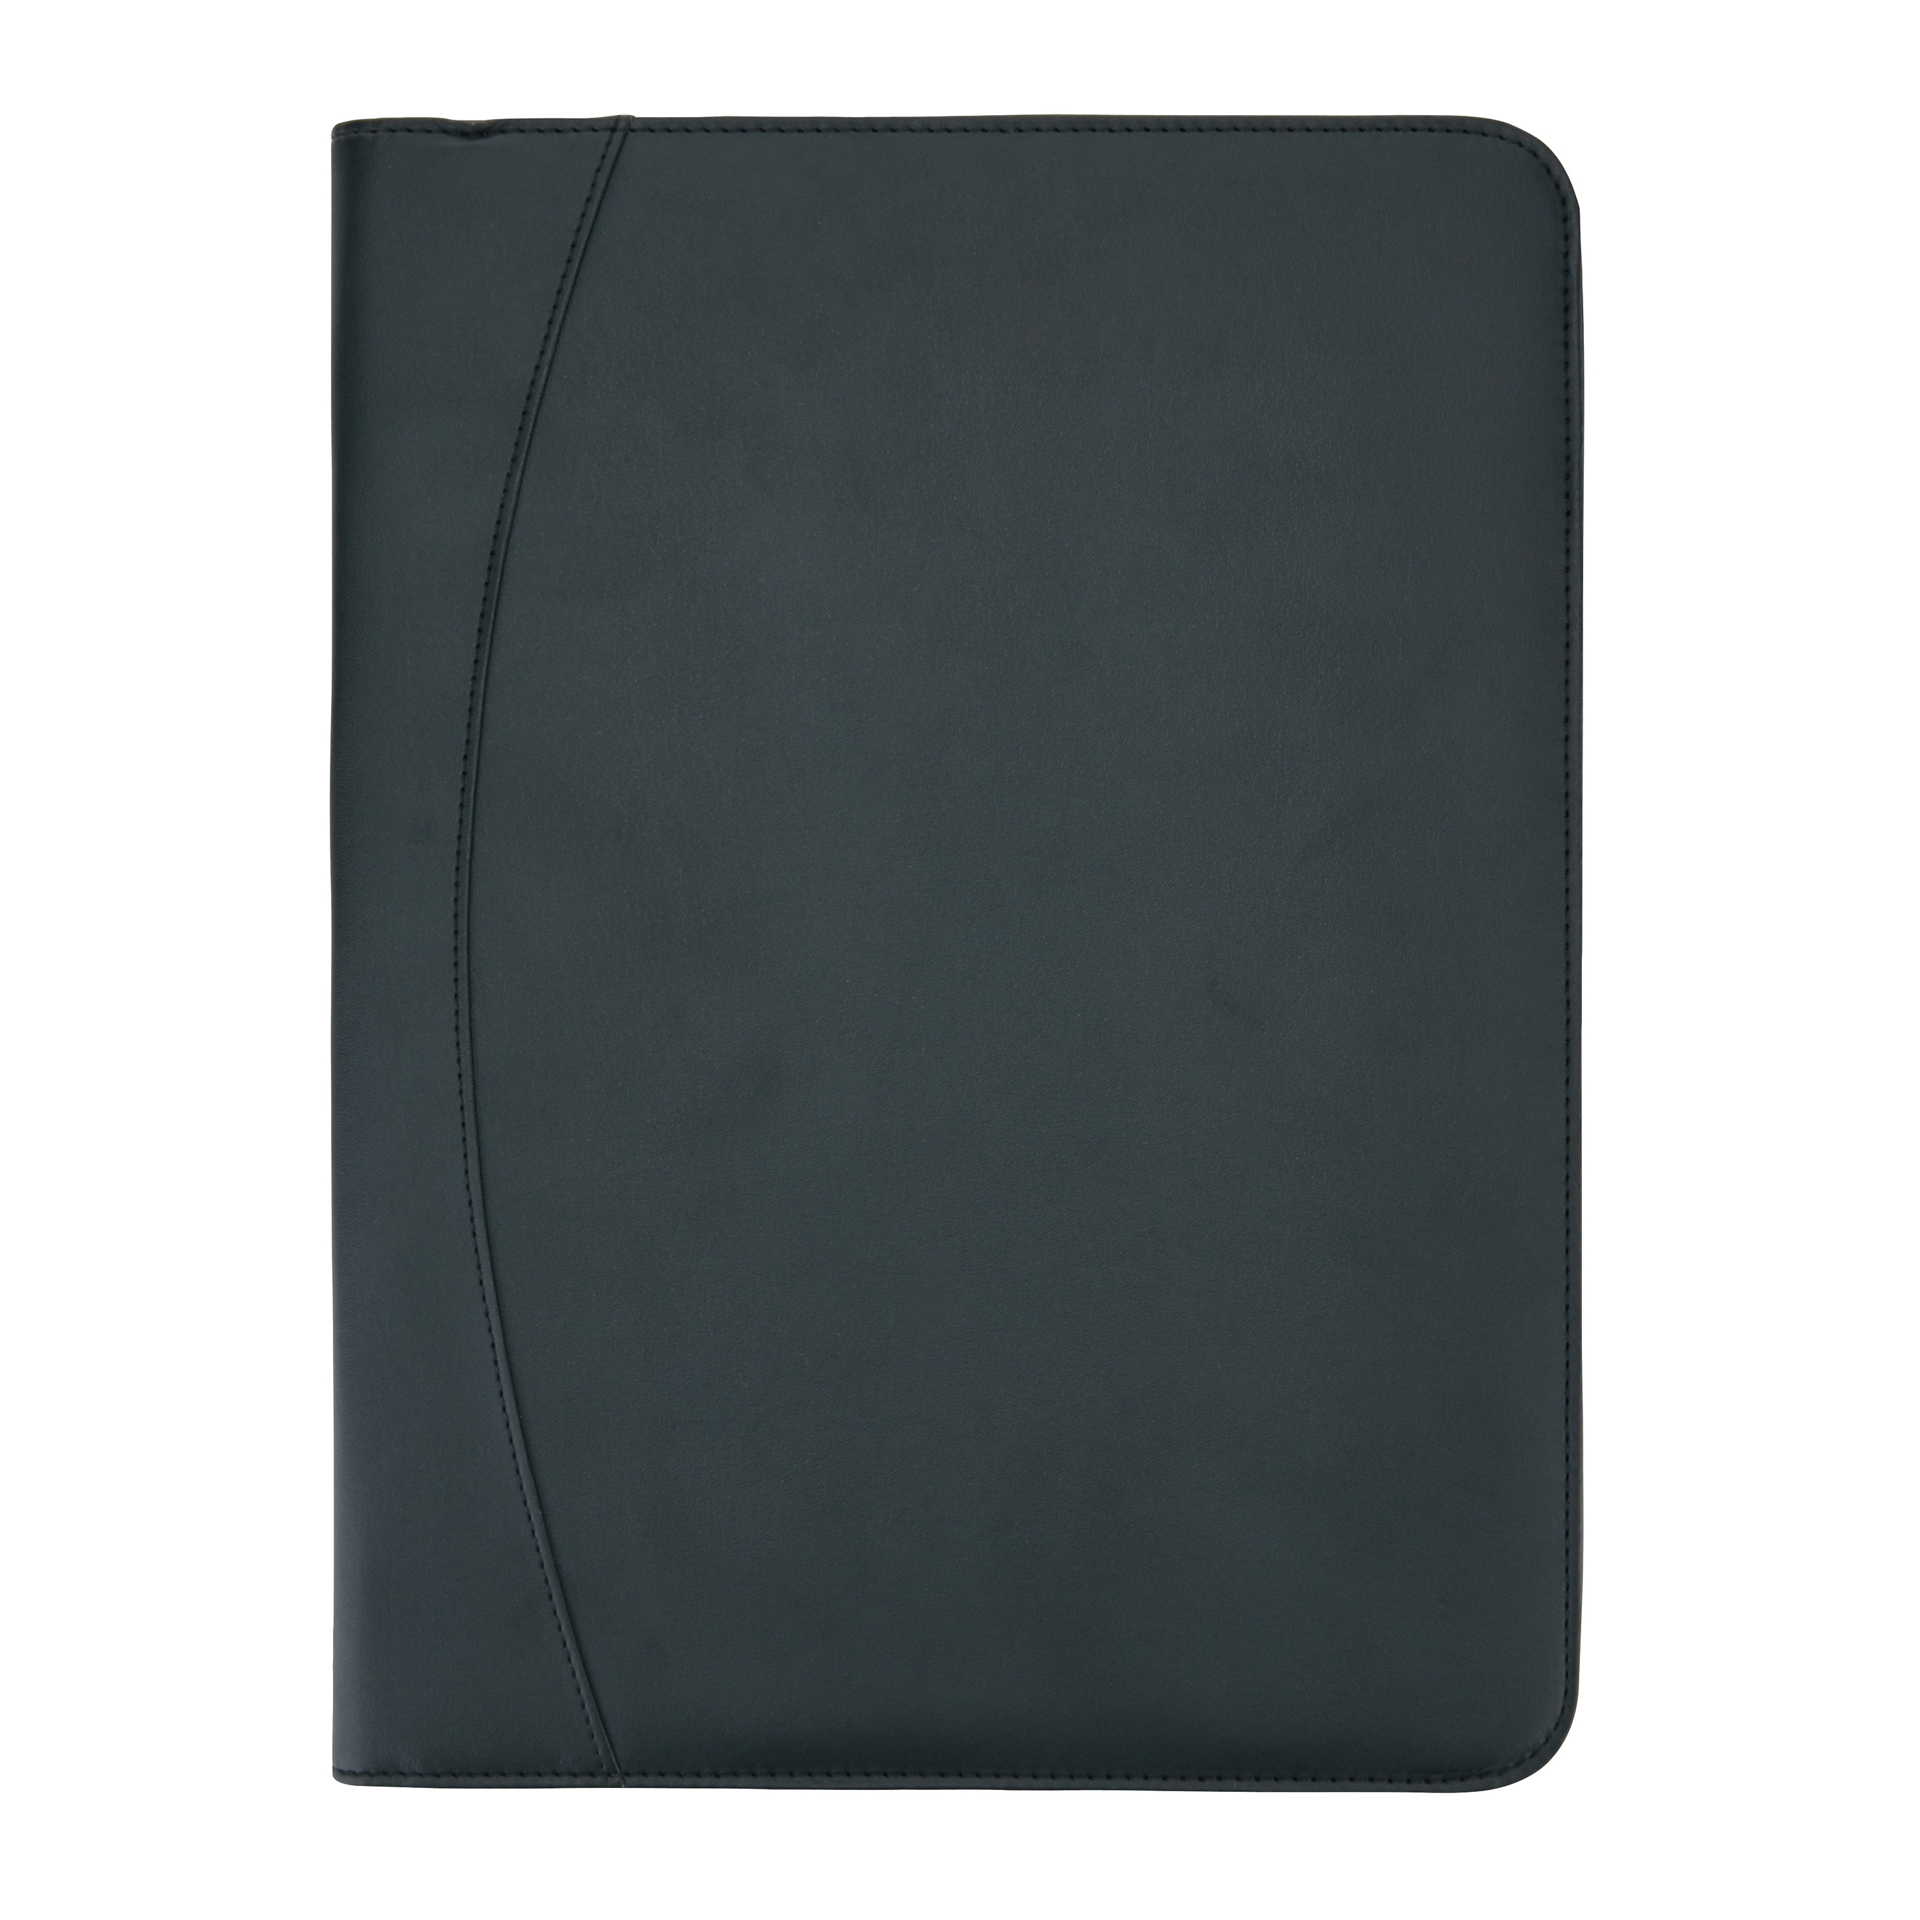 closed flat lay view of the front of the essential tech folder in black